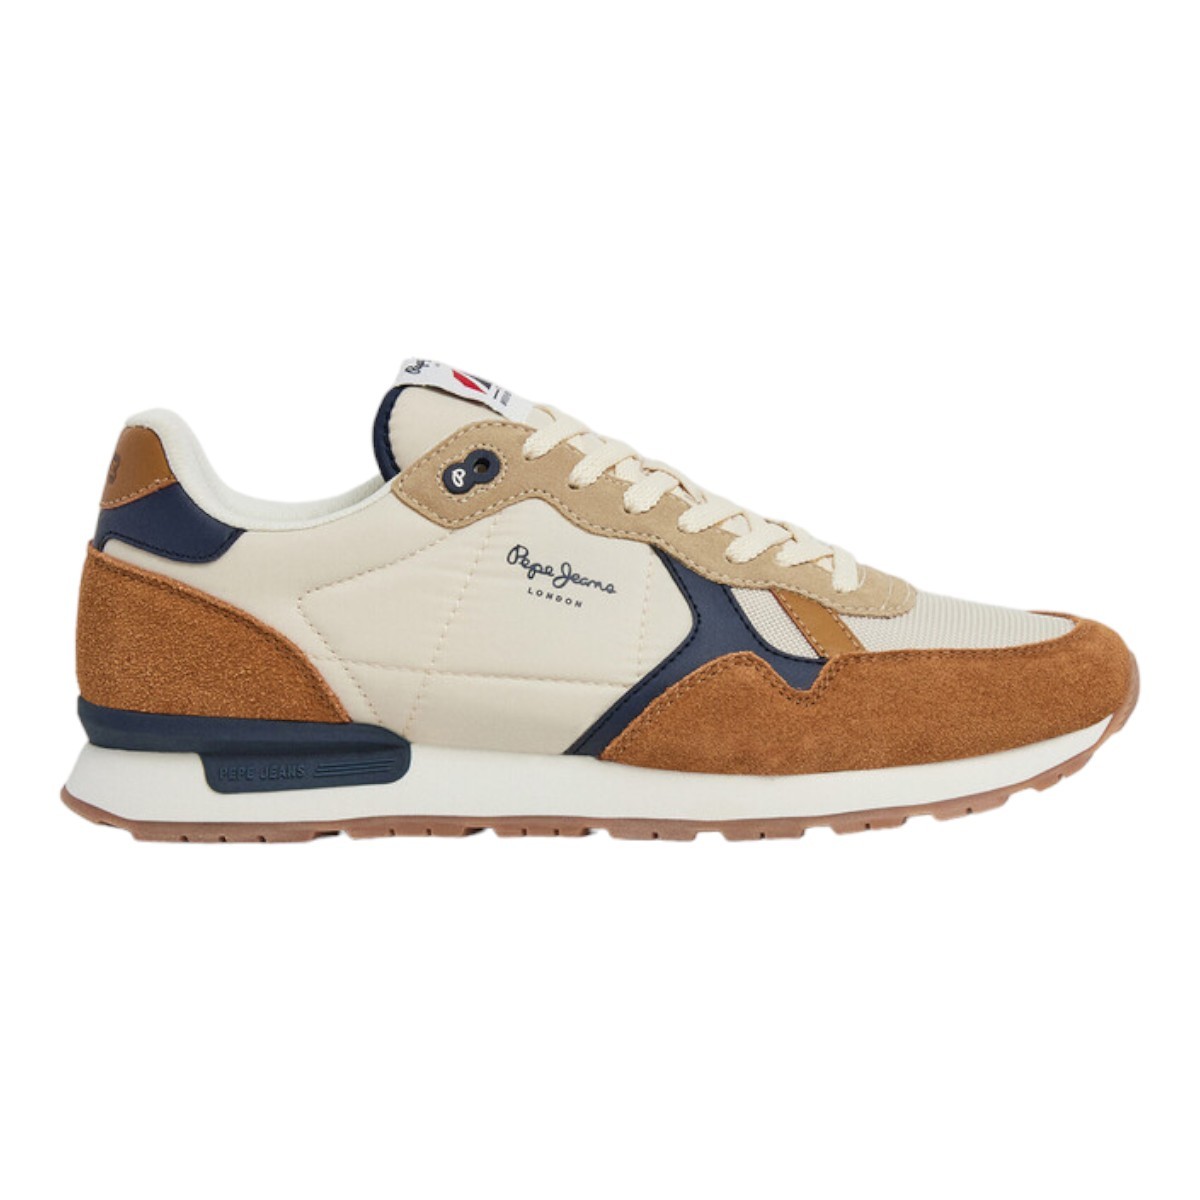 Pepe jeans BRIT MIX M Sneakers Ανδρικά Παπούτσια PMS40006-859 Ταμπά Ταμπά